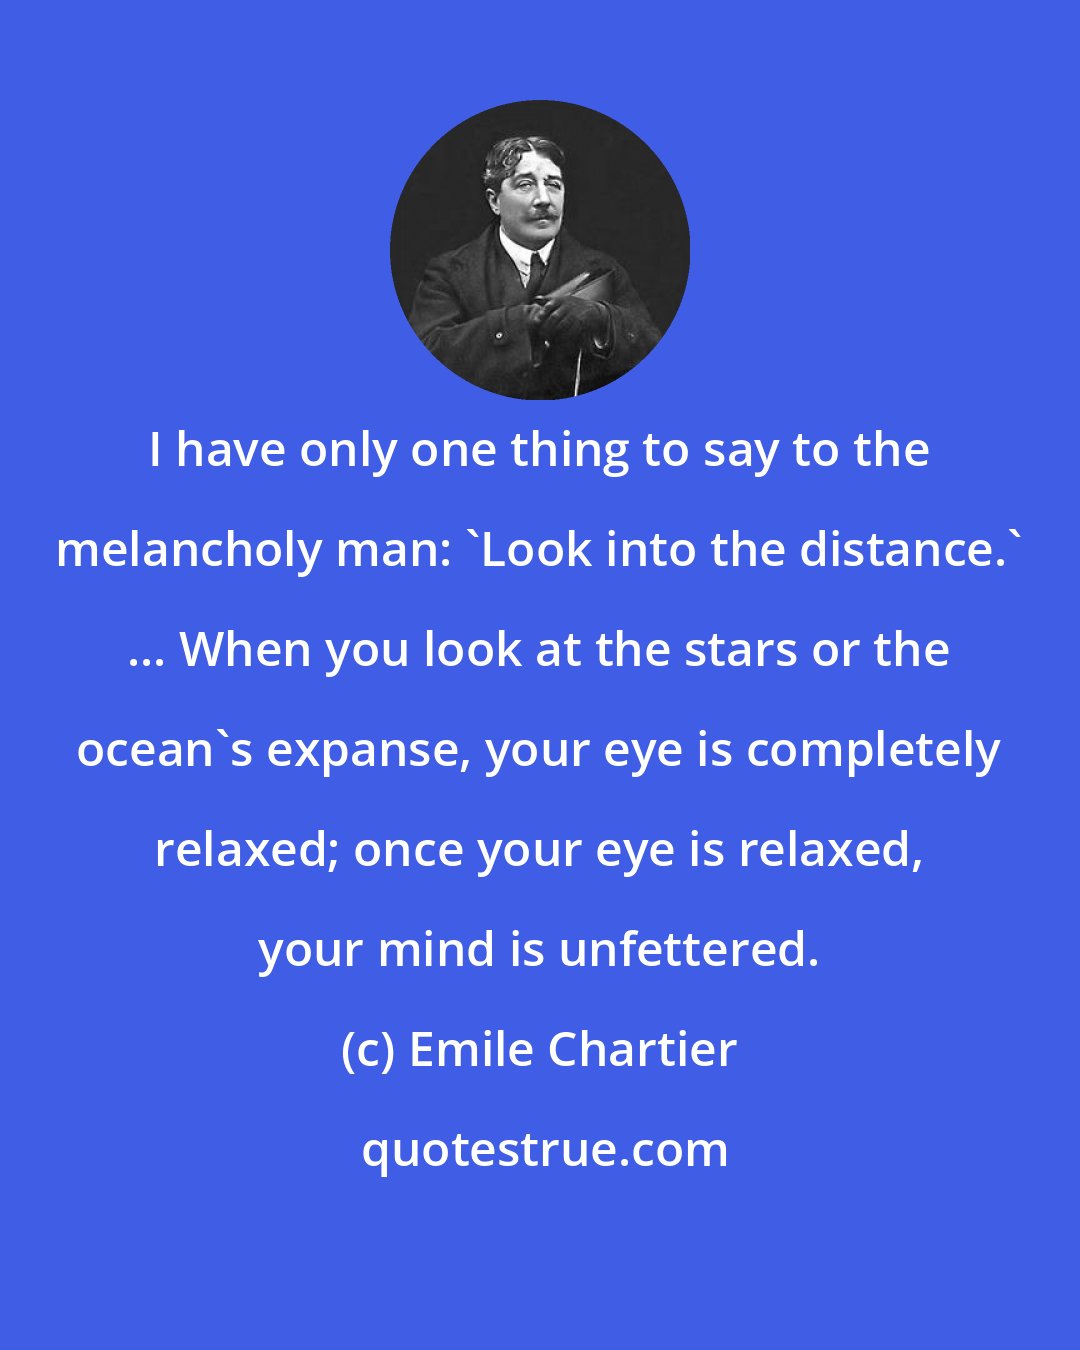 Emile Chartier: I have only one thing to say to the melancholy man: 'Look into the distance.' ... When you look at the stars or the ocean's expanse, your eye is completely relaxed; once your eye is relaxed, your mind is unfettered.